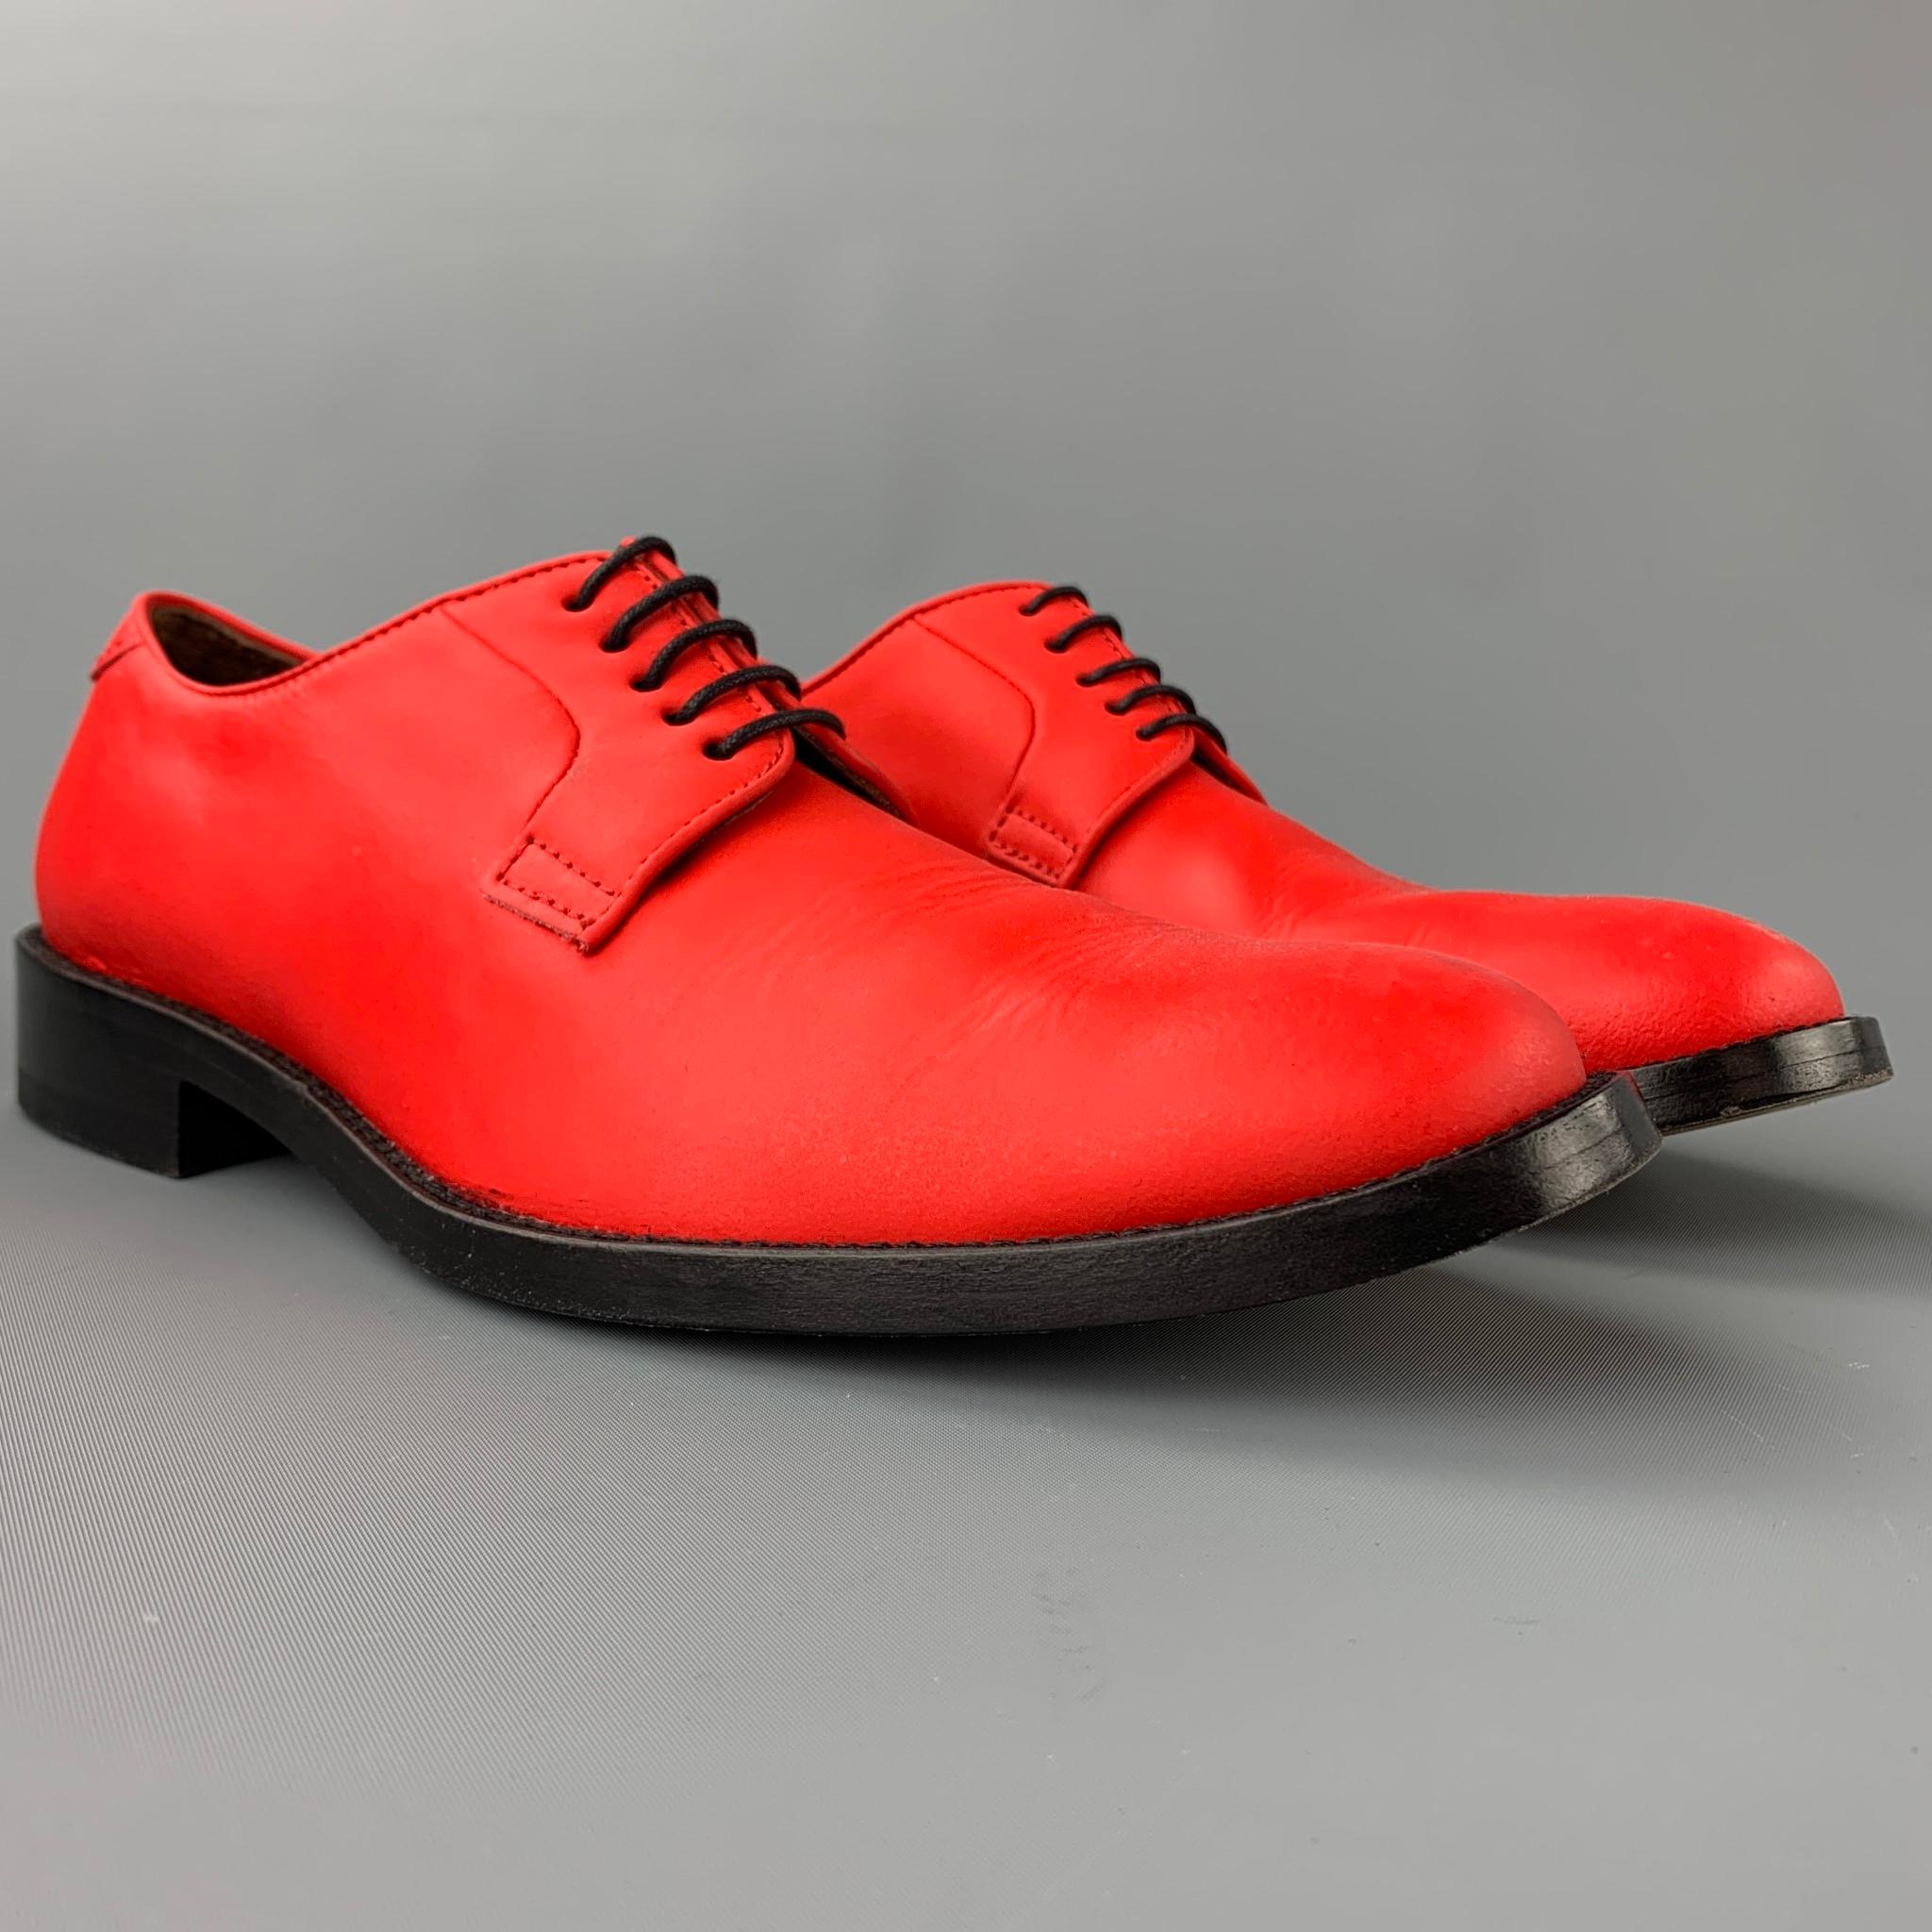 ACNE STUDIOS shoes comes in a red leather featuring a cap toe, wooden sole, and a lace up closure. Moderate wear. Made in Italy.

Good Pre-Owned Condition.
Marked: EU 42

Outsole: 

12 in. x 4 in. 

